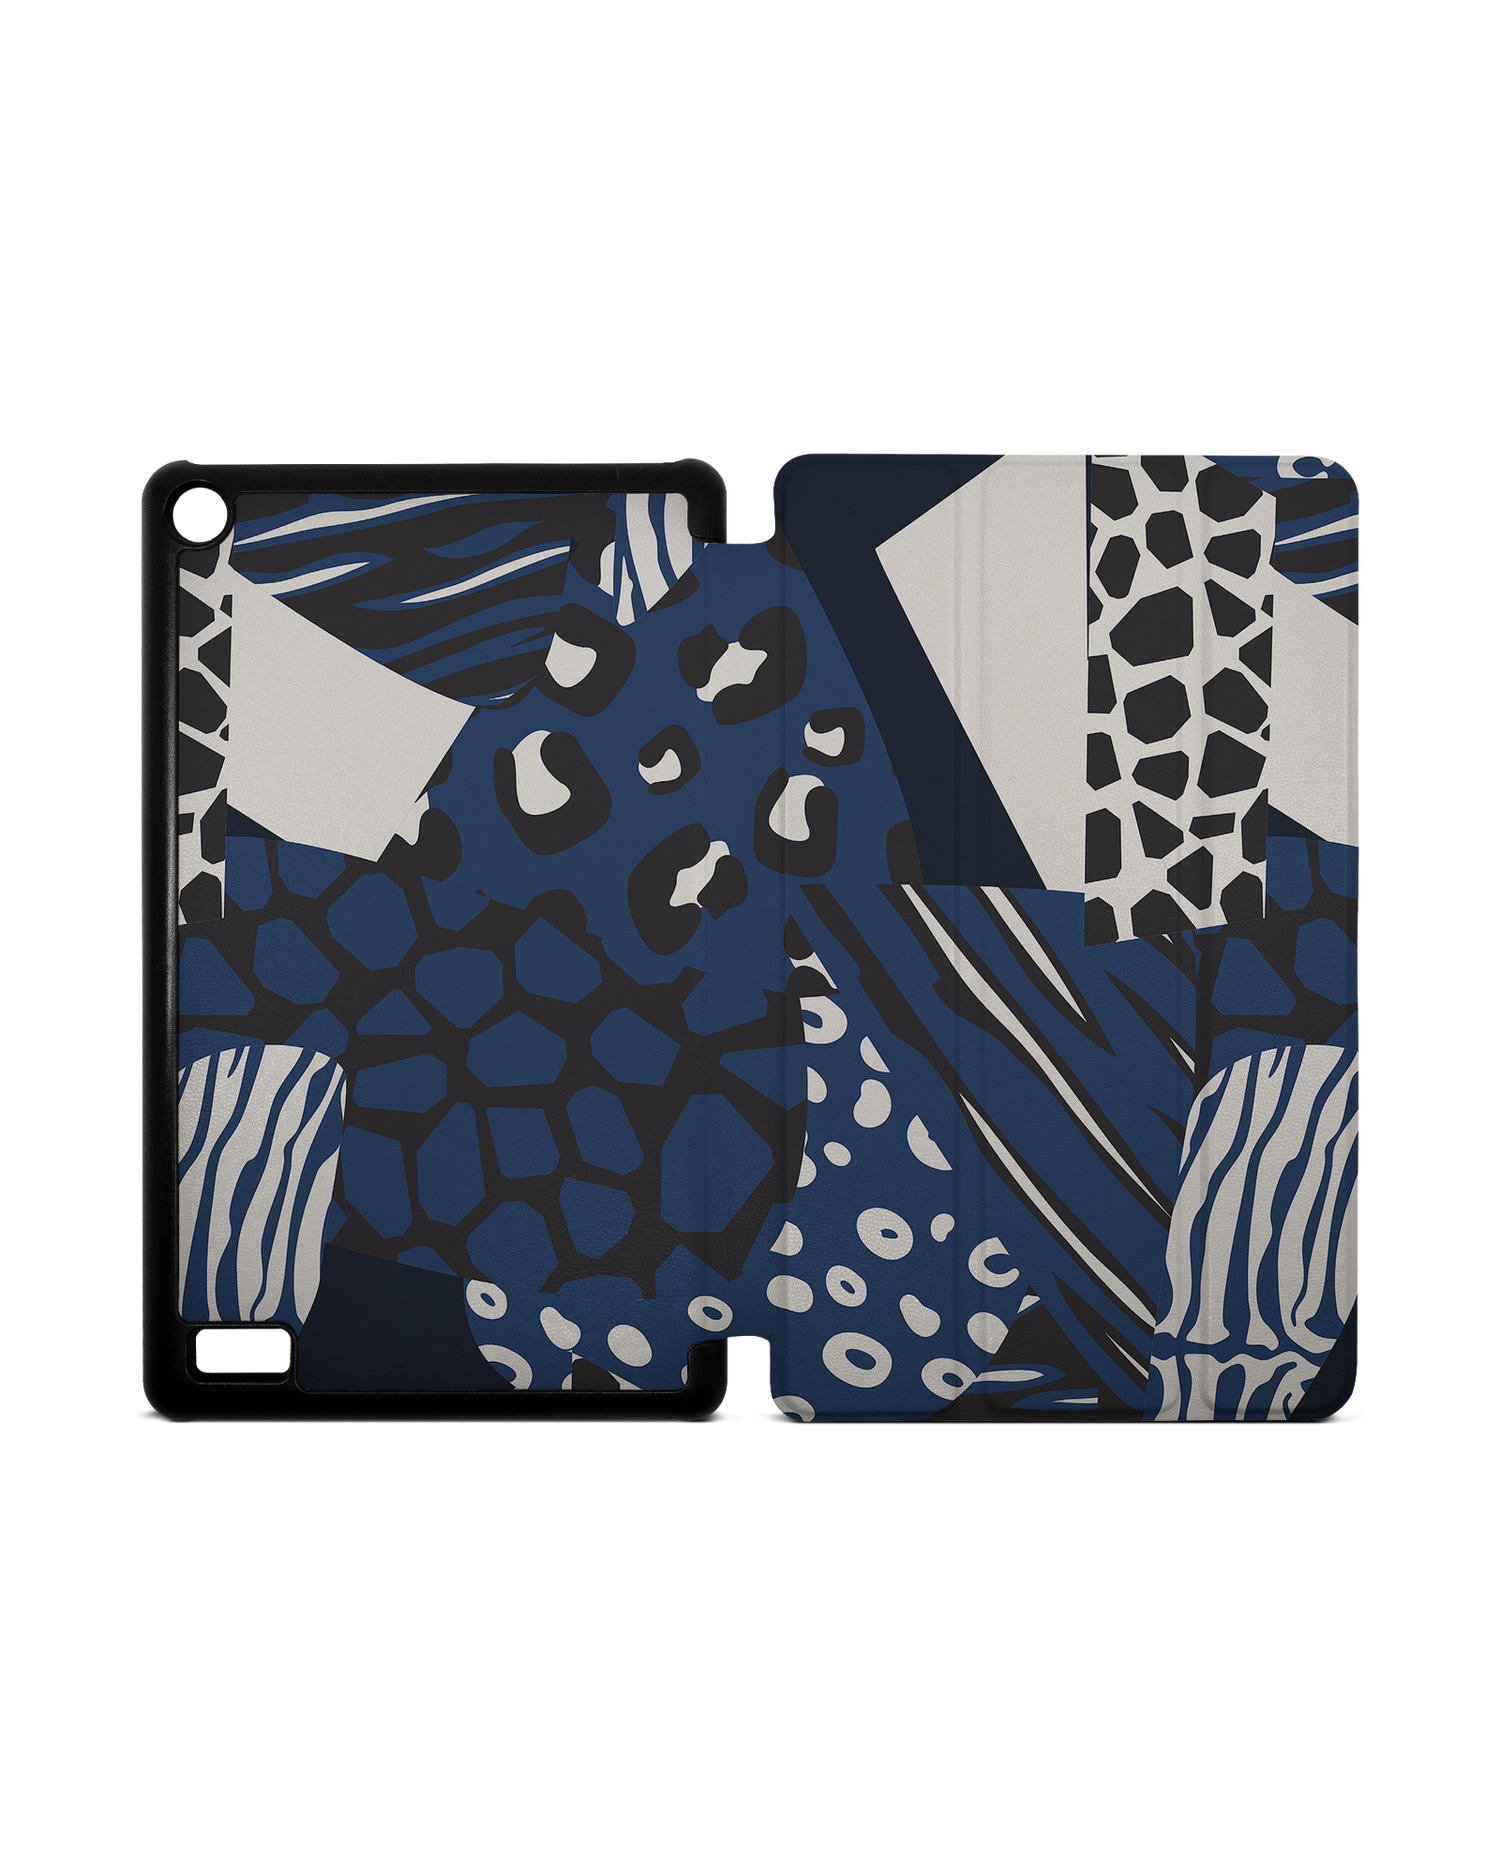 Animal Print Patchwork Tablet Smart Case for Amazon Fire 7: Opened